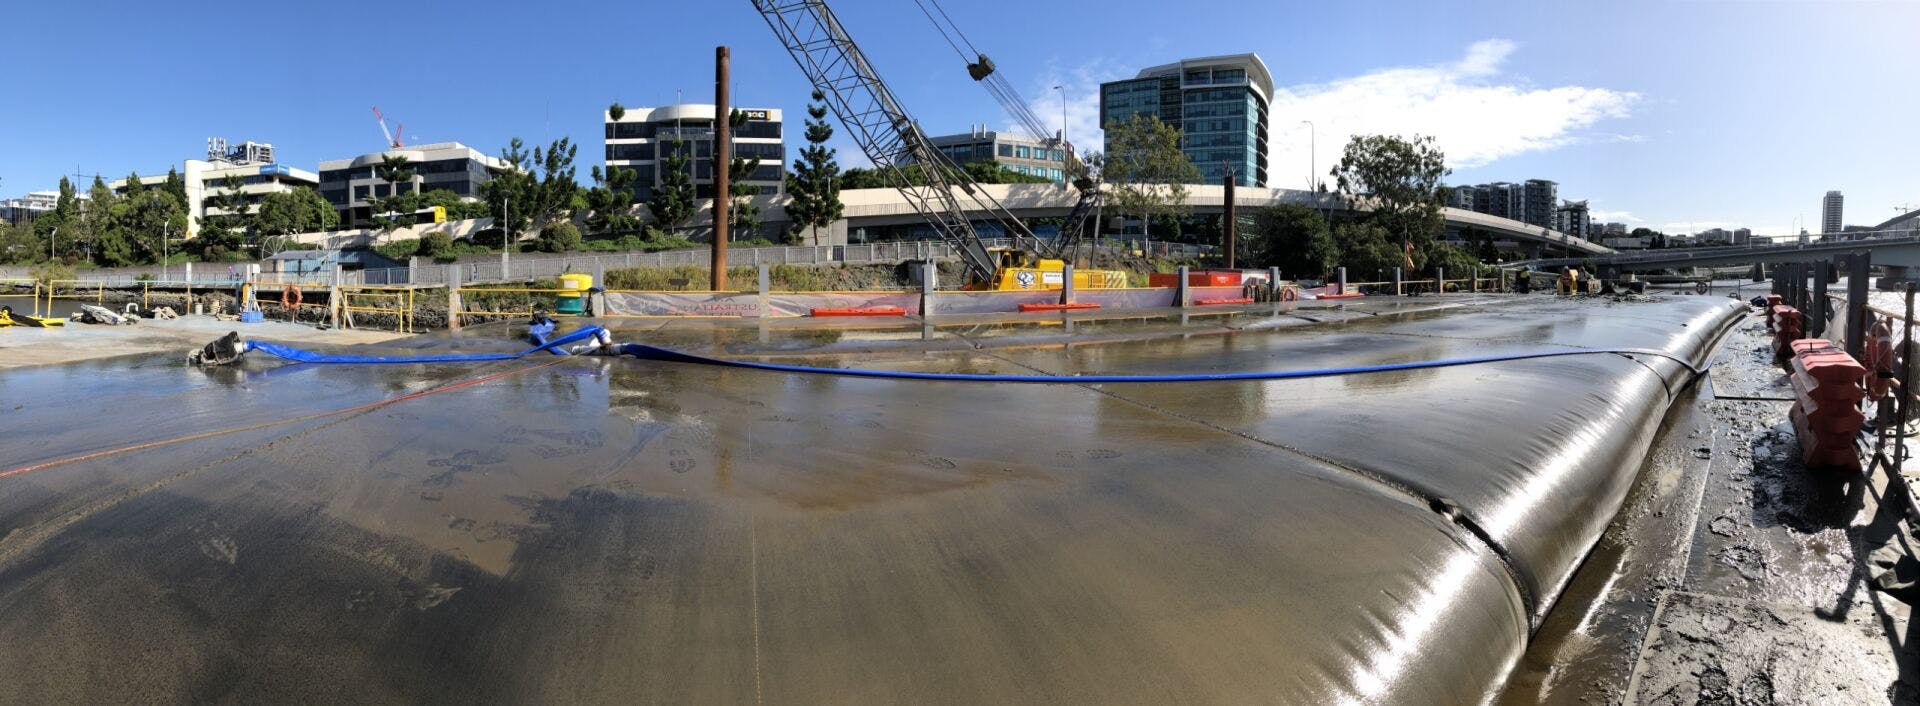 In a groundbreaking project in Australia, a specially designed remote-controlled underwater dredger was used to clear and clean a blocked stormwater drain that discharged into the Brisbane River.